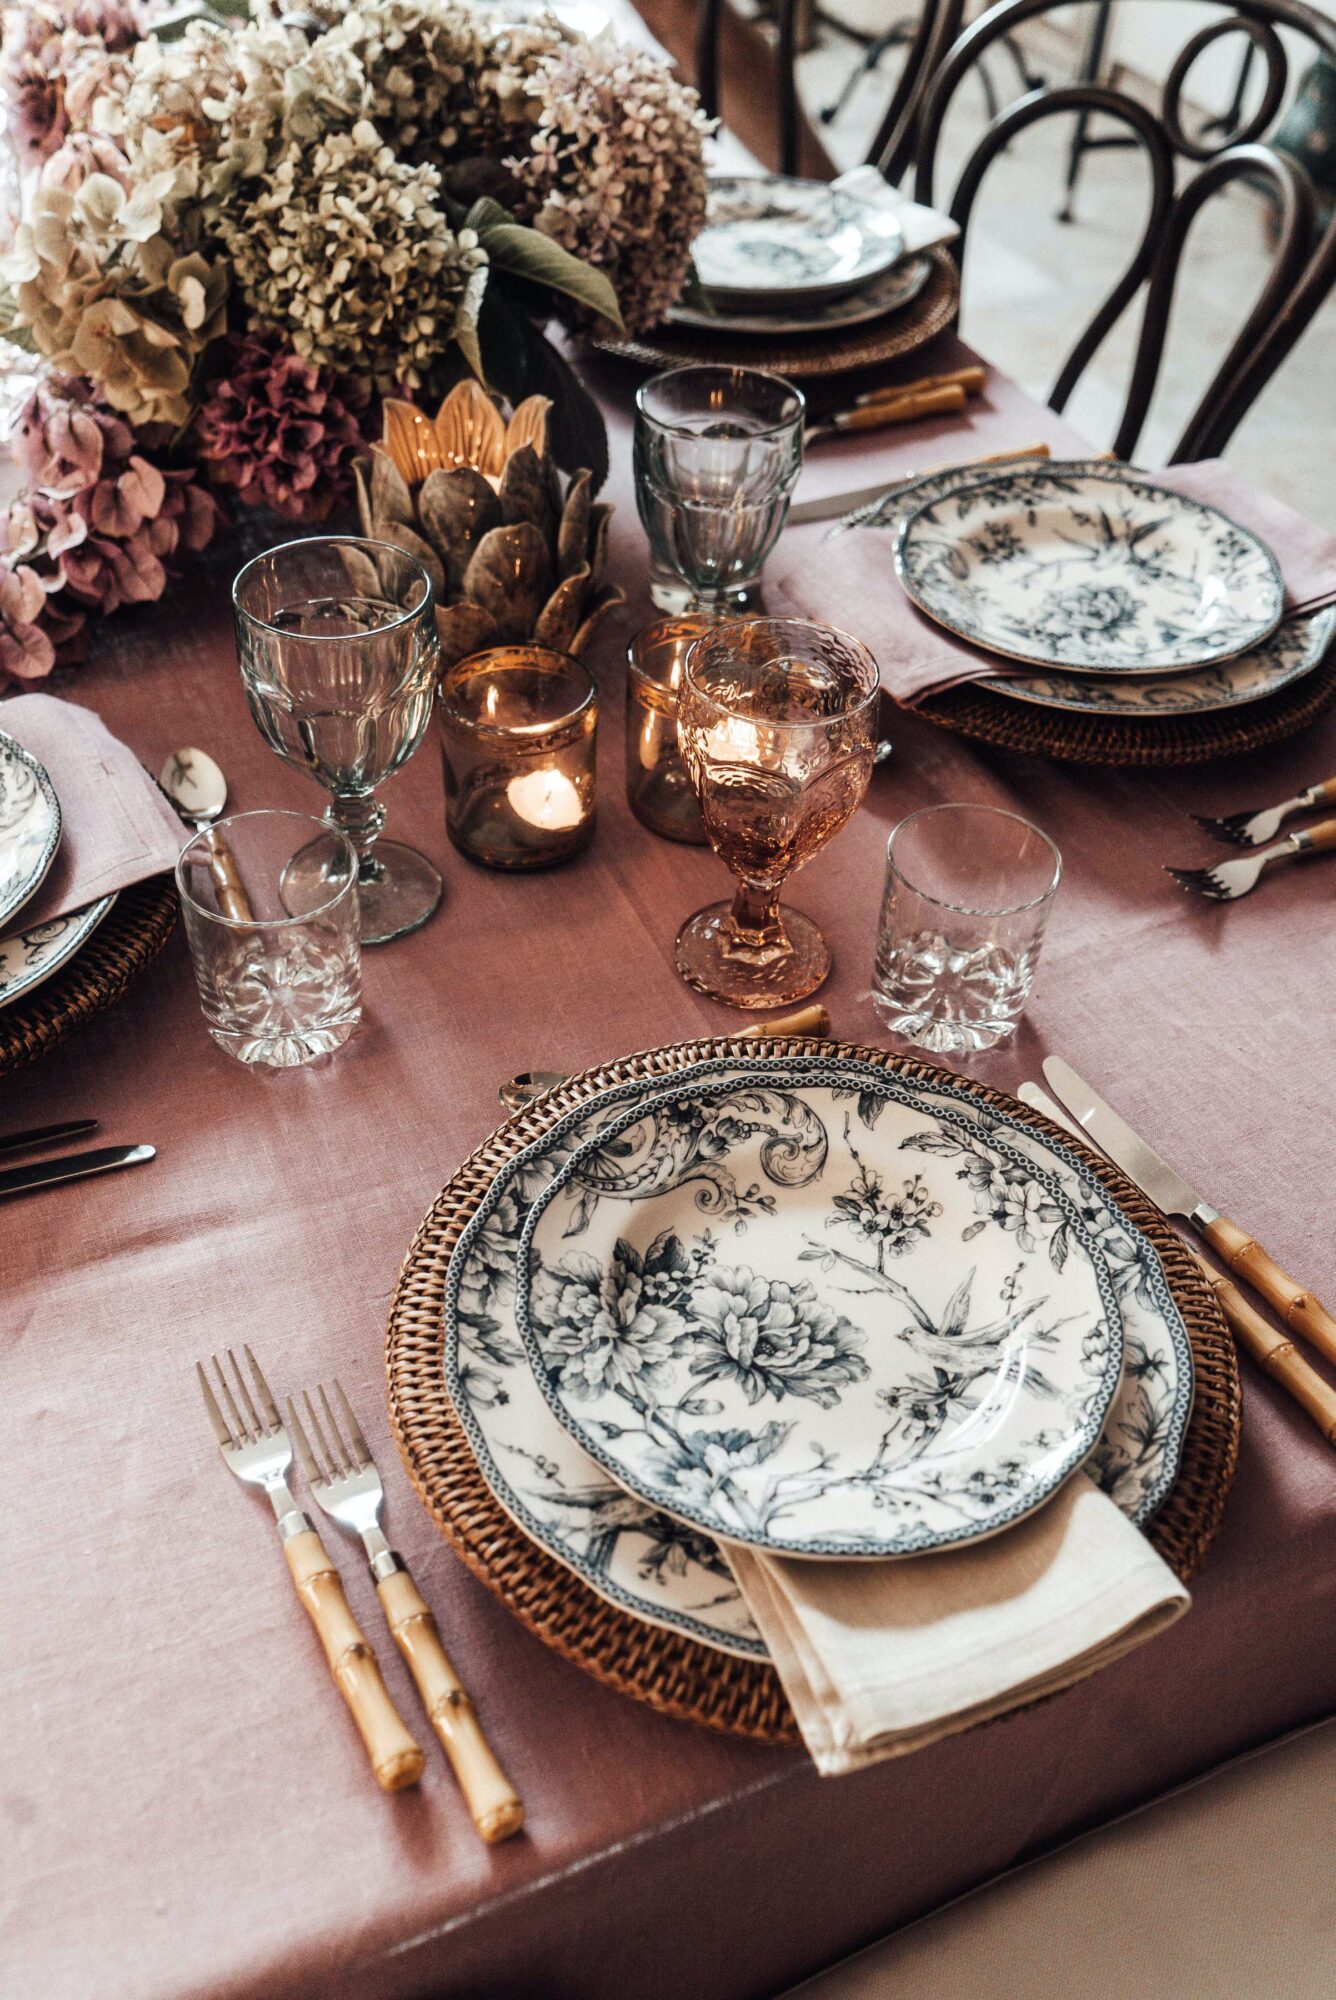 A table setting with plates and silverware on a pink tablecloth.